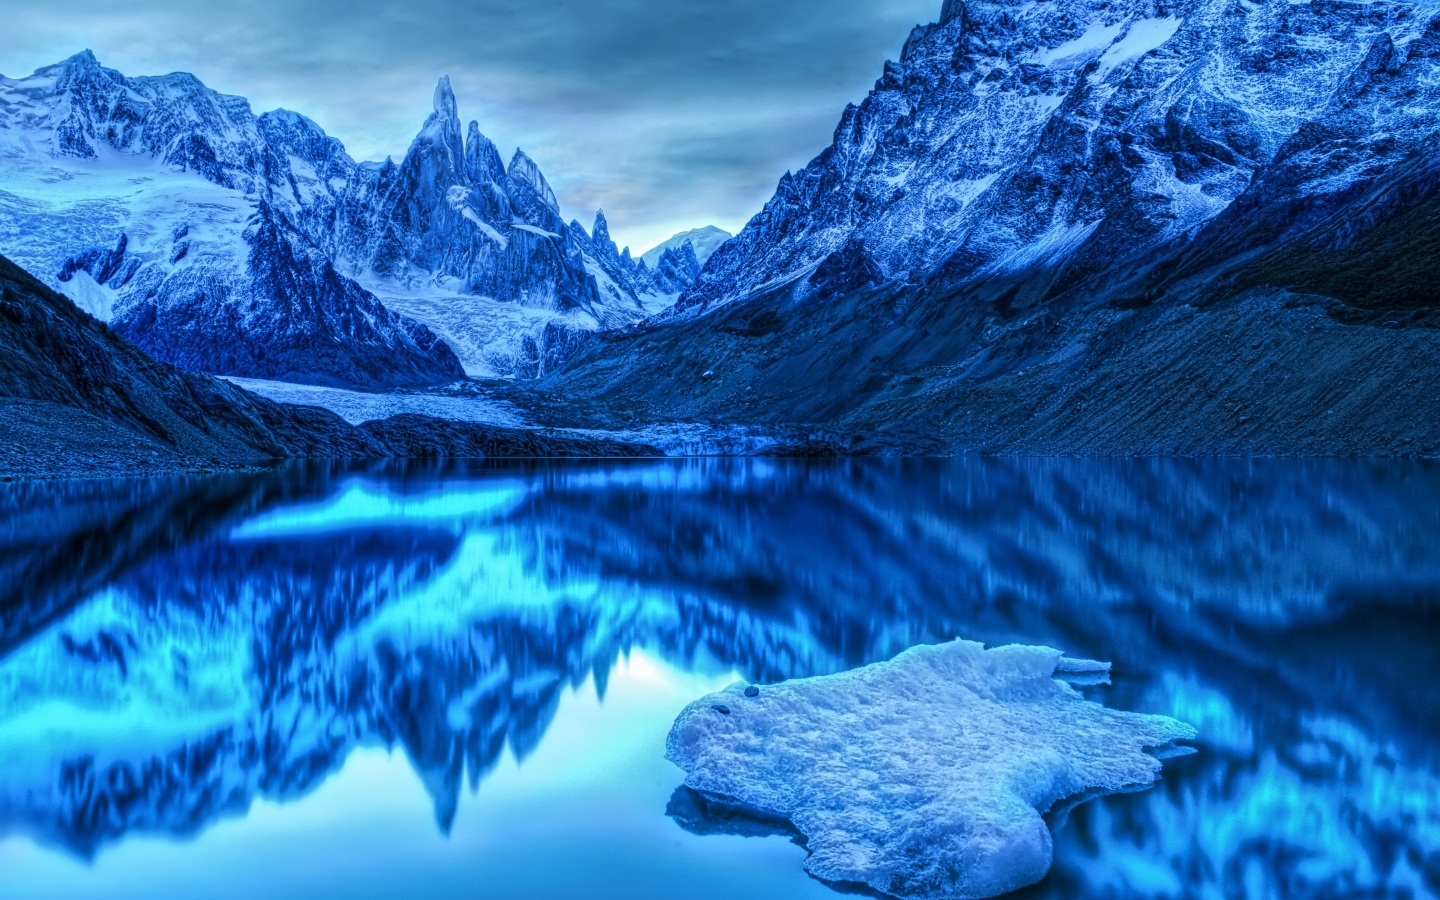 Snow-capped mountains reflected in the water at dusk